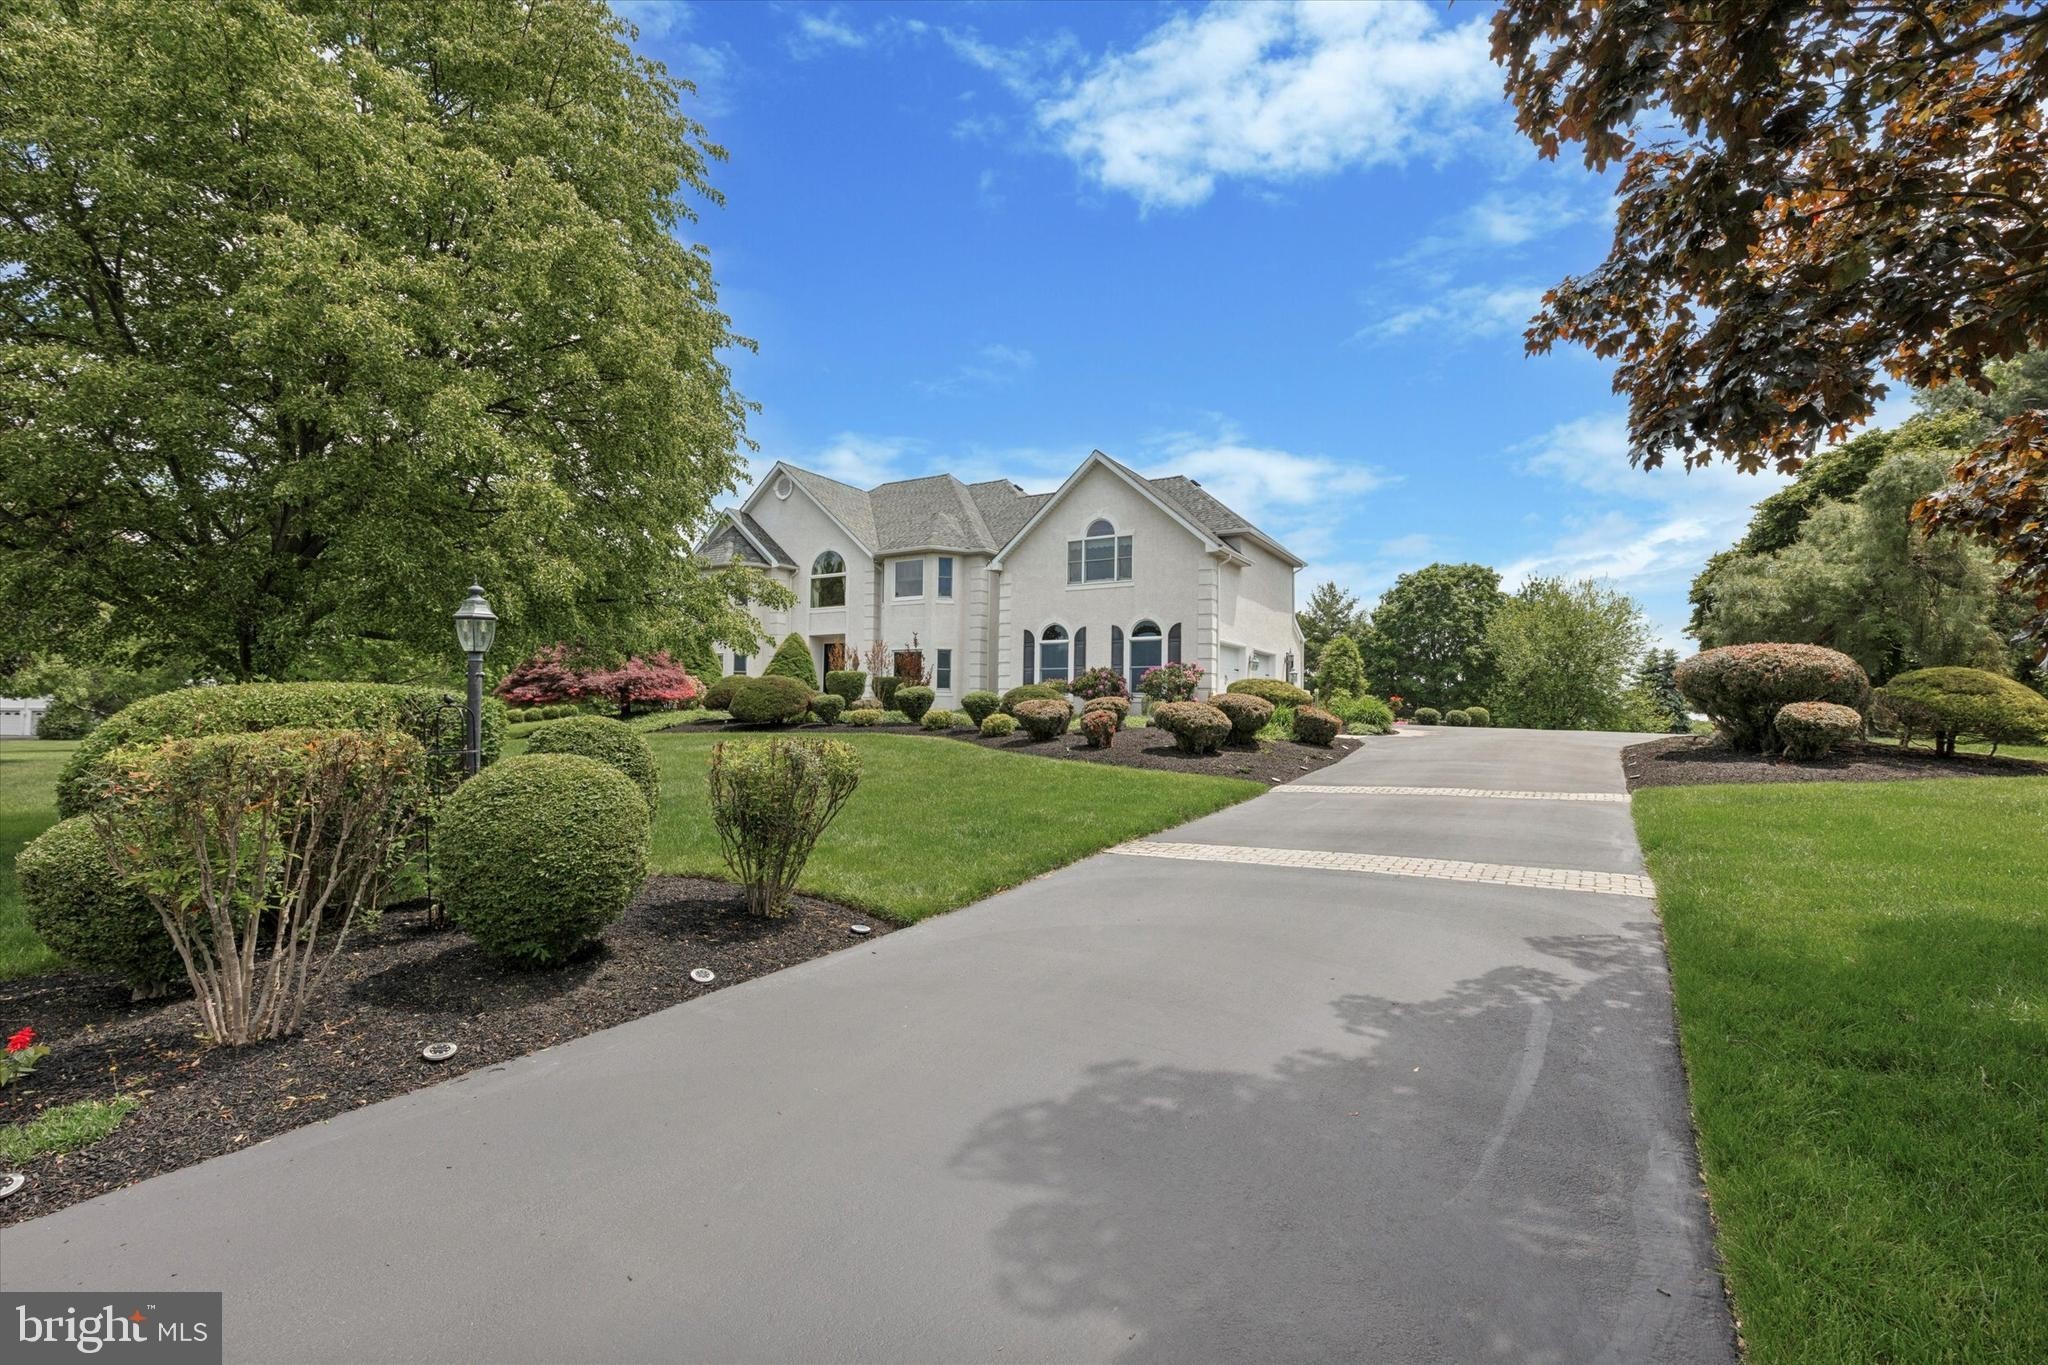 3. 2106 Country View Lane